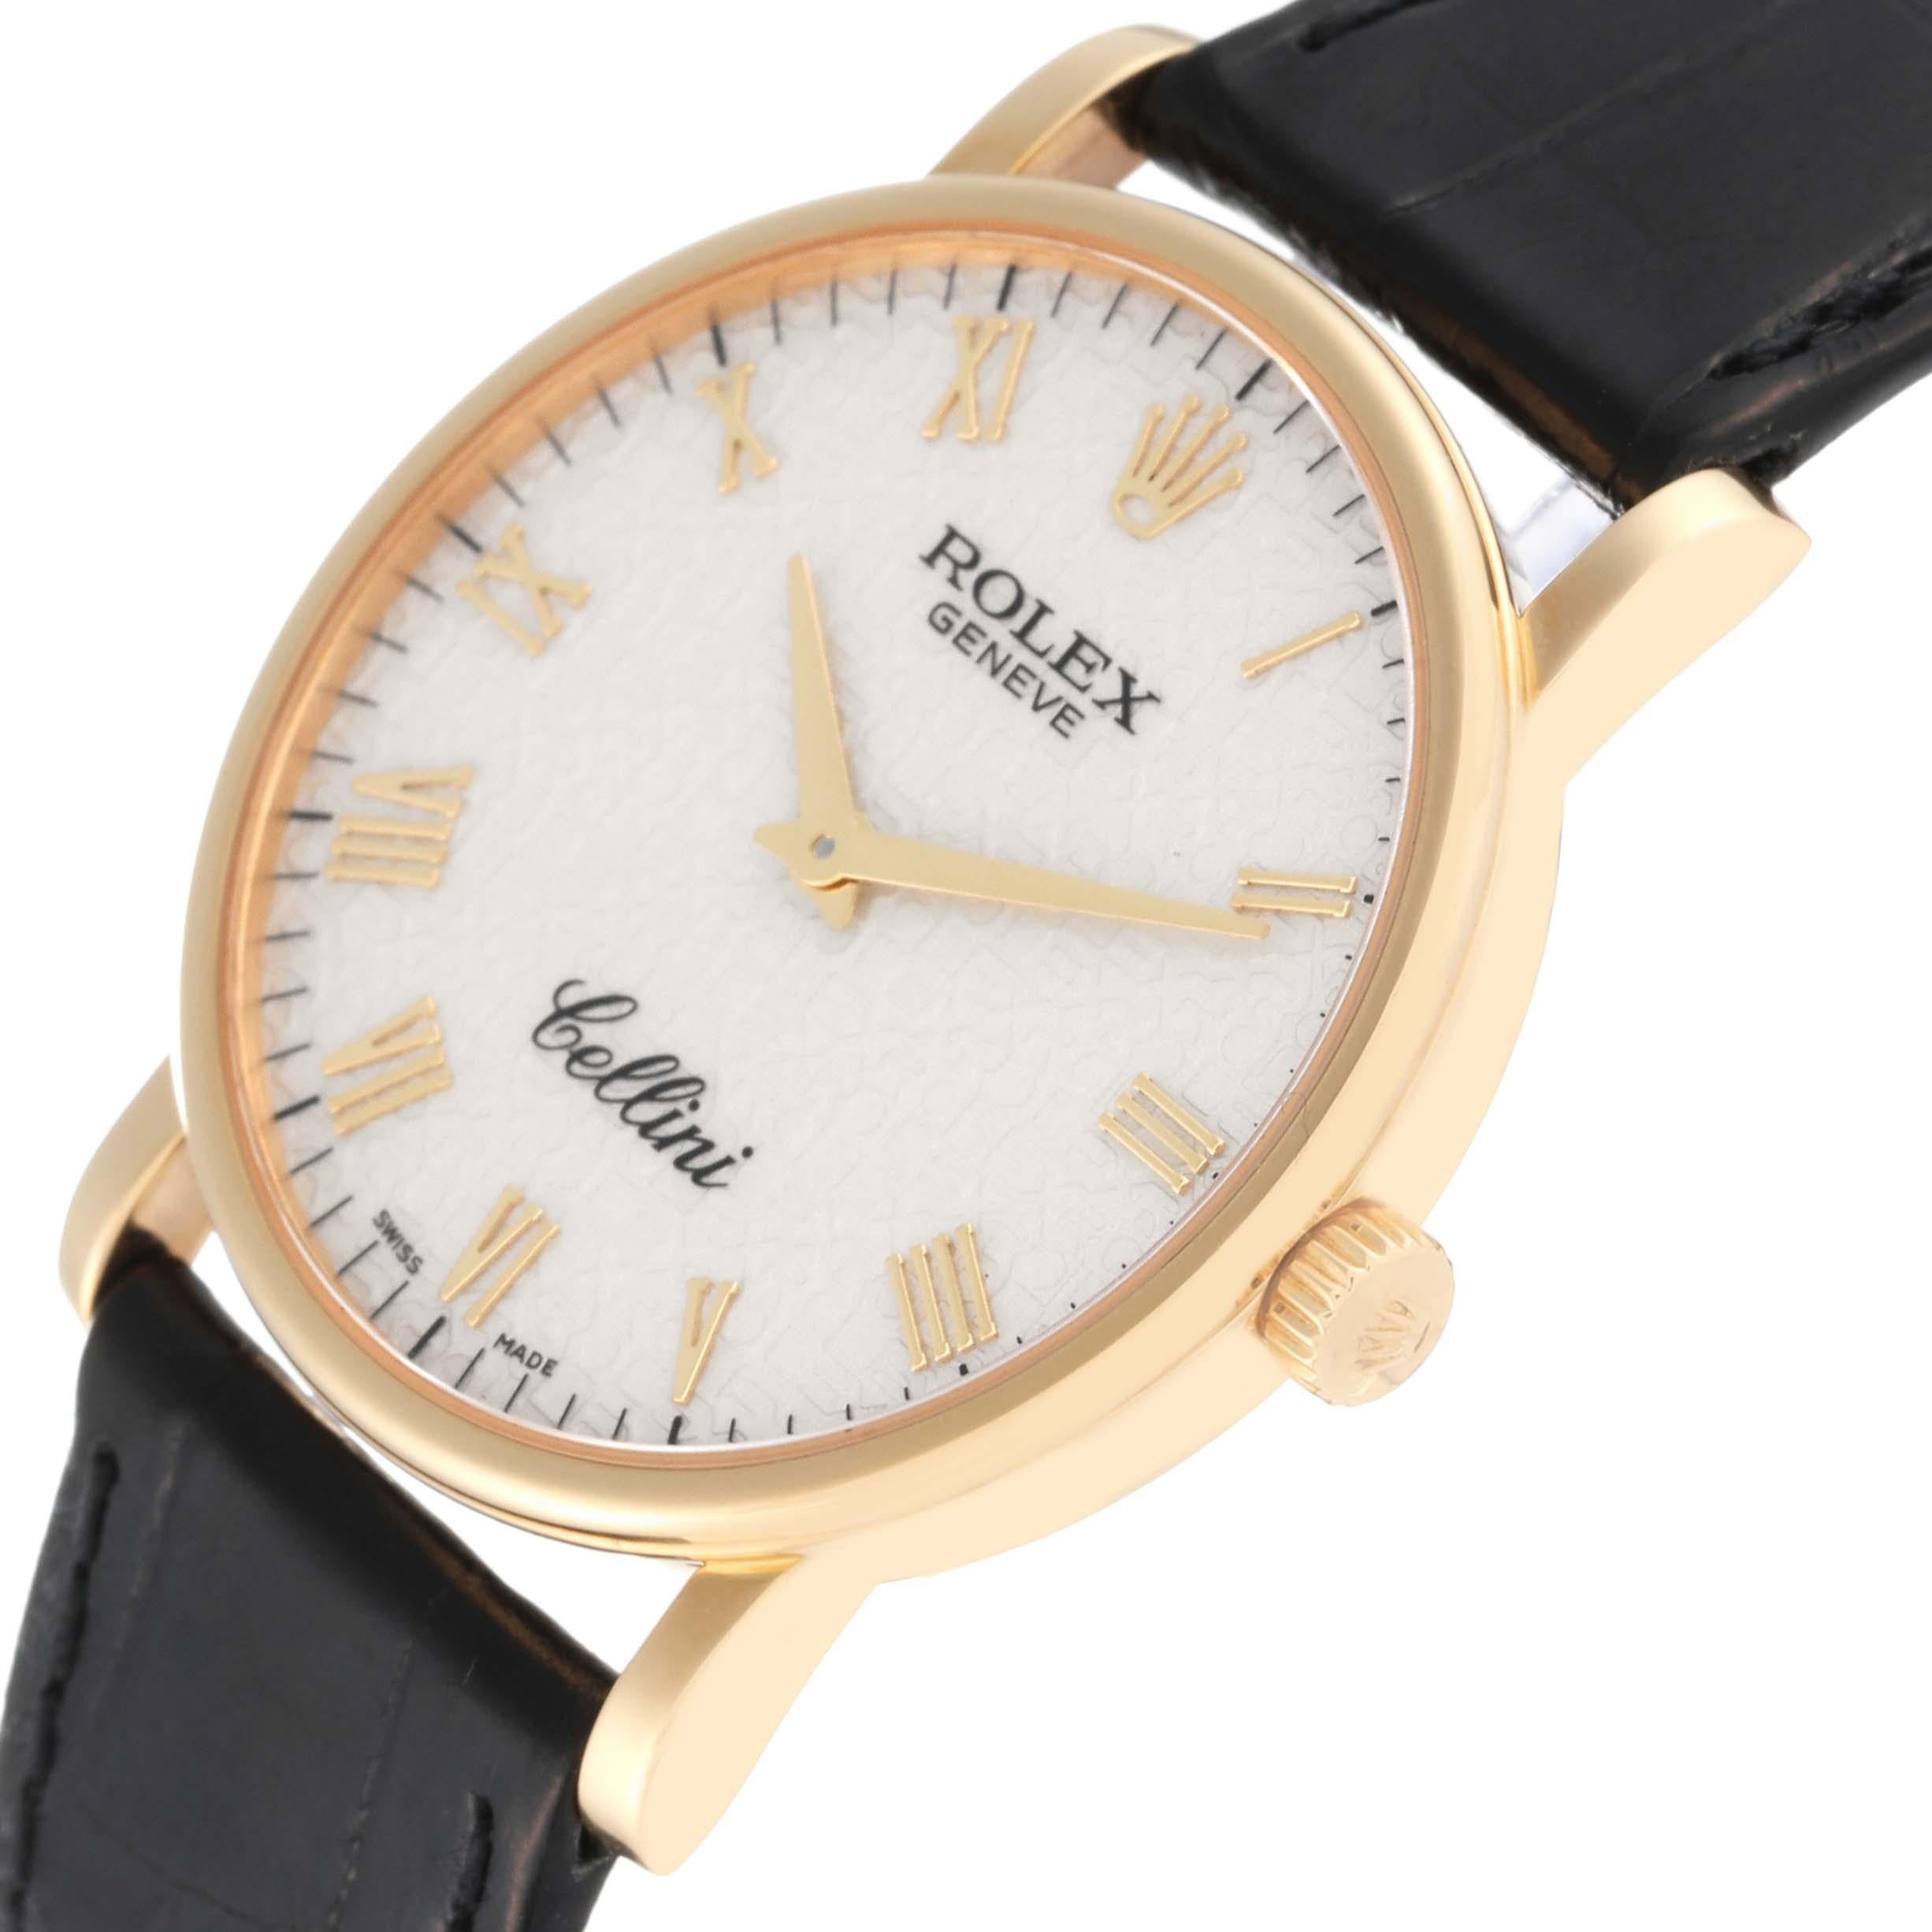 Rolex Cellini Classic Yellow Gold Ivory Anniversary Dial Mens Watch 5115 Card. Manual winding movement. 18k yellow gold slim case 32mm in diameter. 5.5mm case thickness. Rolex logo on the crown. . Scratch resistant sapphire crystal. Flat profile.